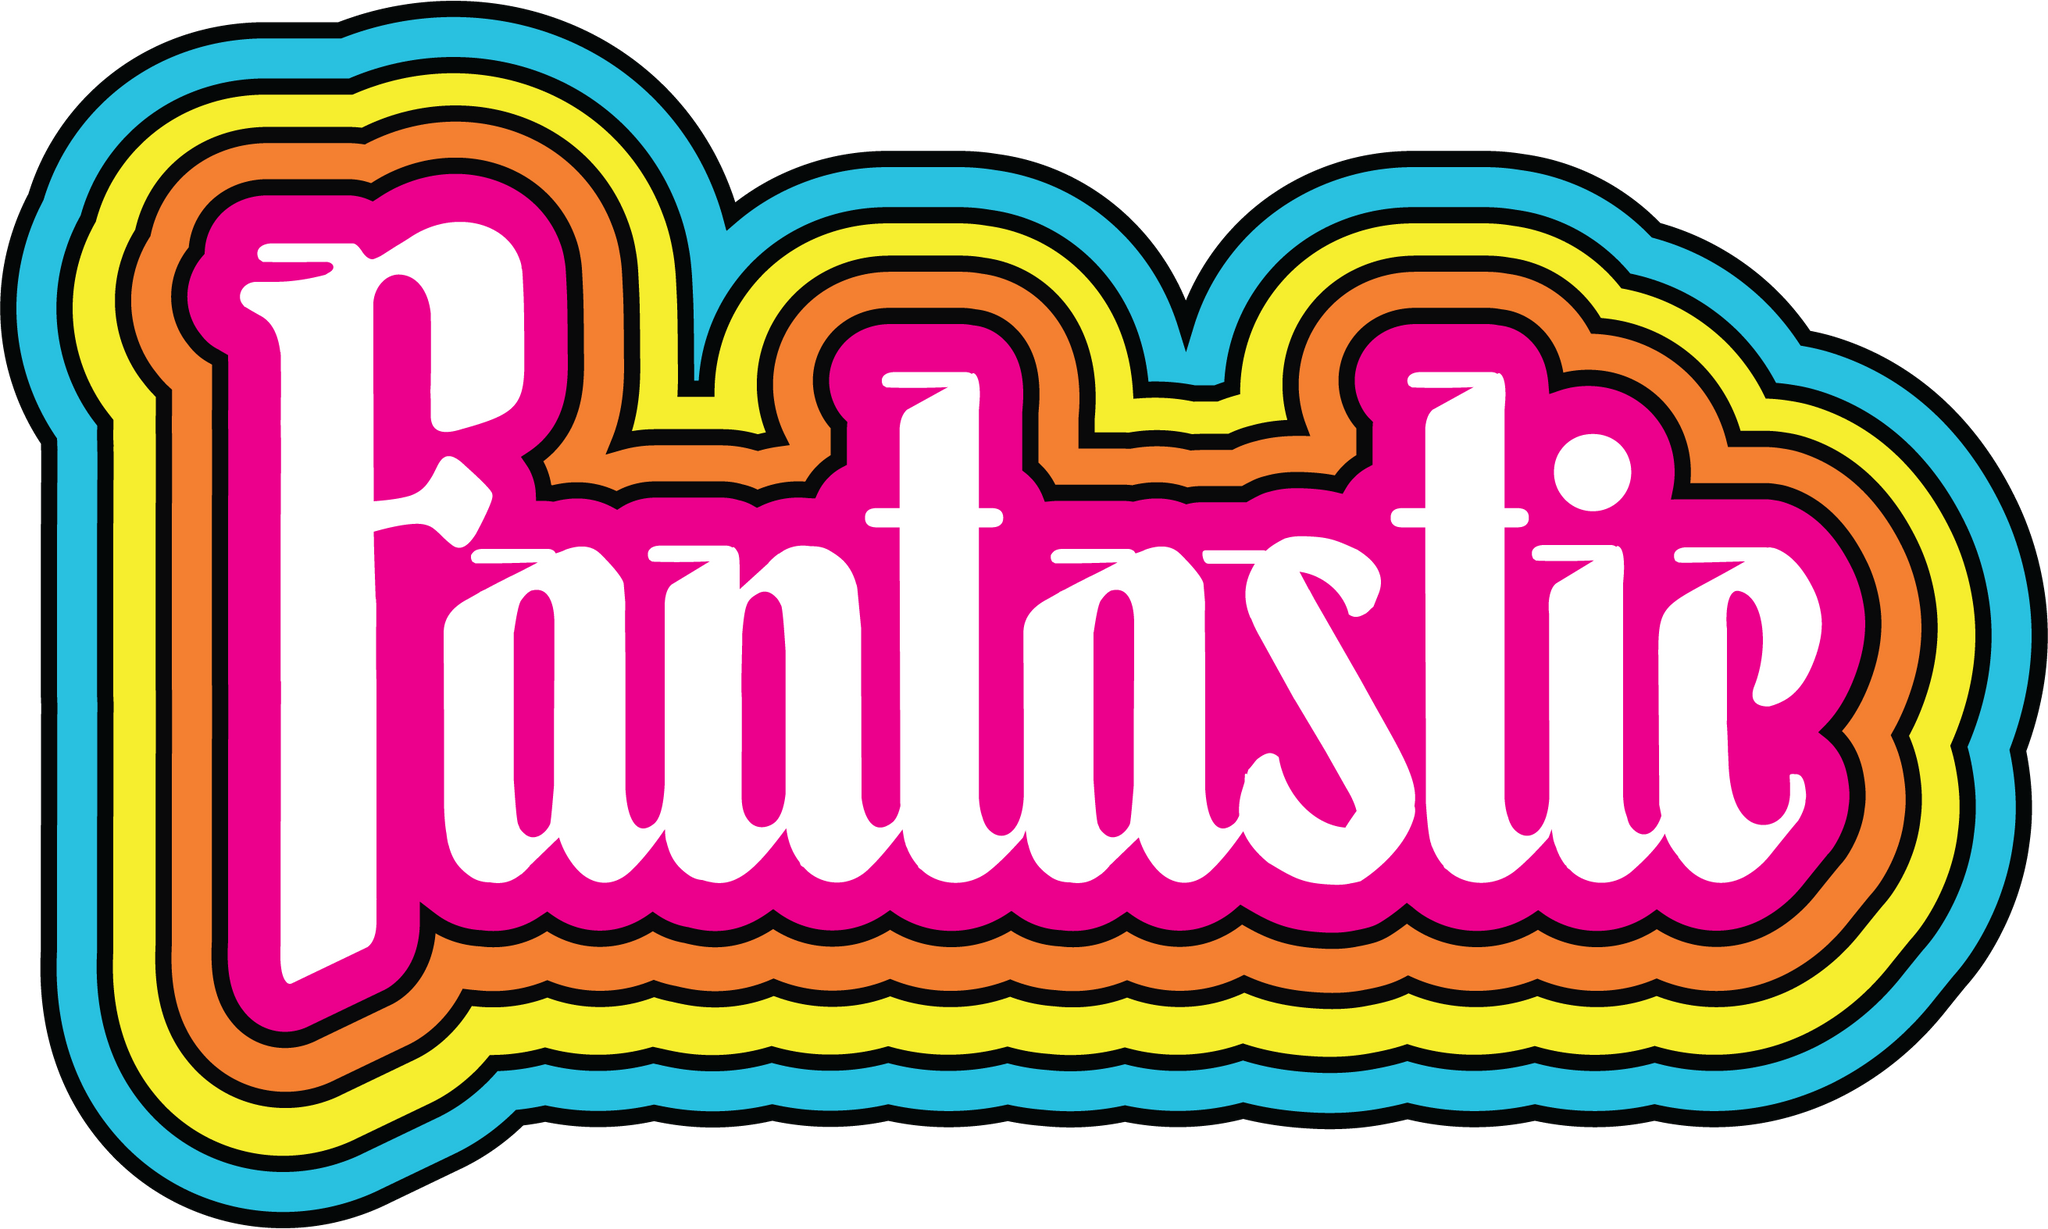 design of waterproof sticker that features the word "Fantastic!" with outlines of pink, orange, yellow and blue